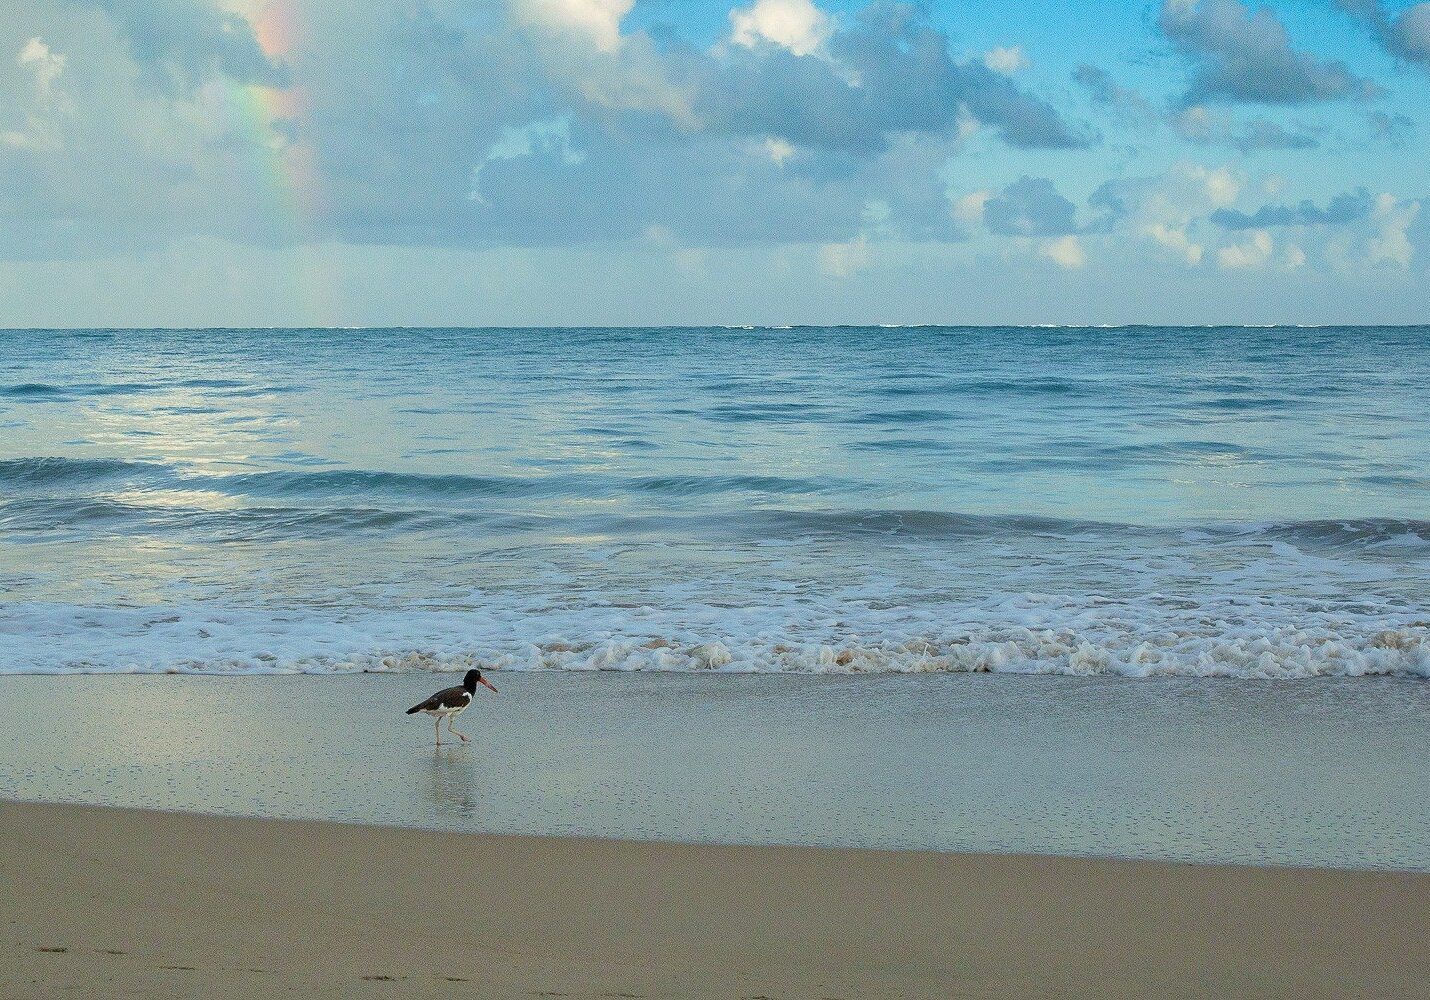 This Little Guy was having Breakfast on the beach as a rainbow popped out behind him. #Islaverde #PuertoRico